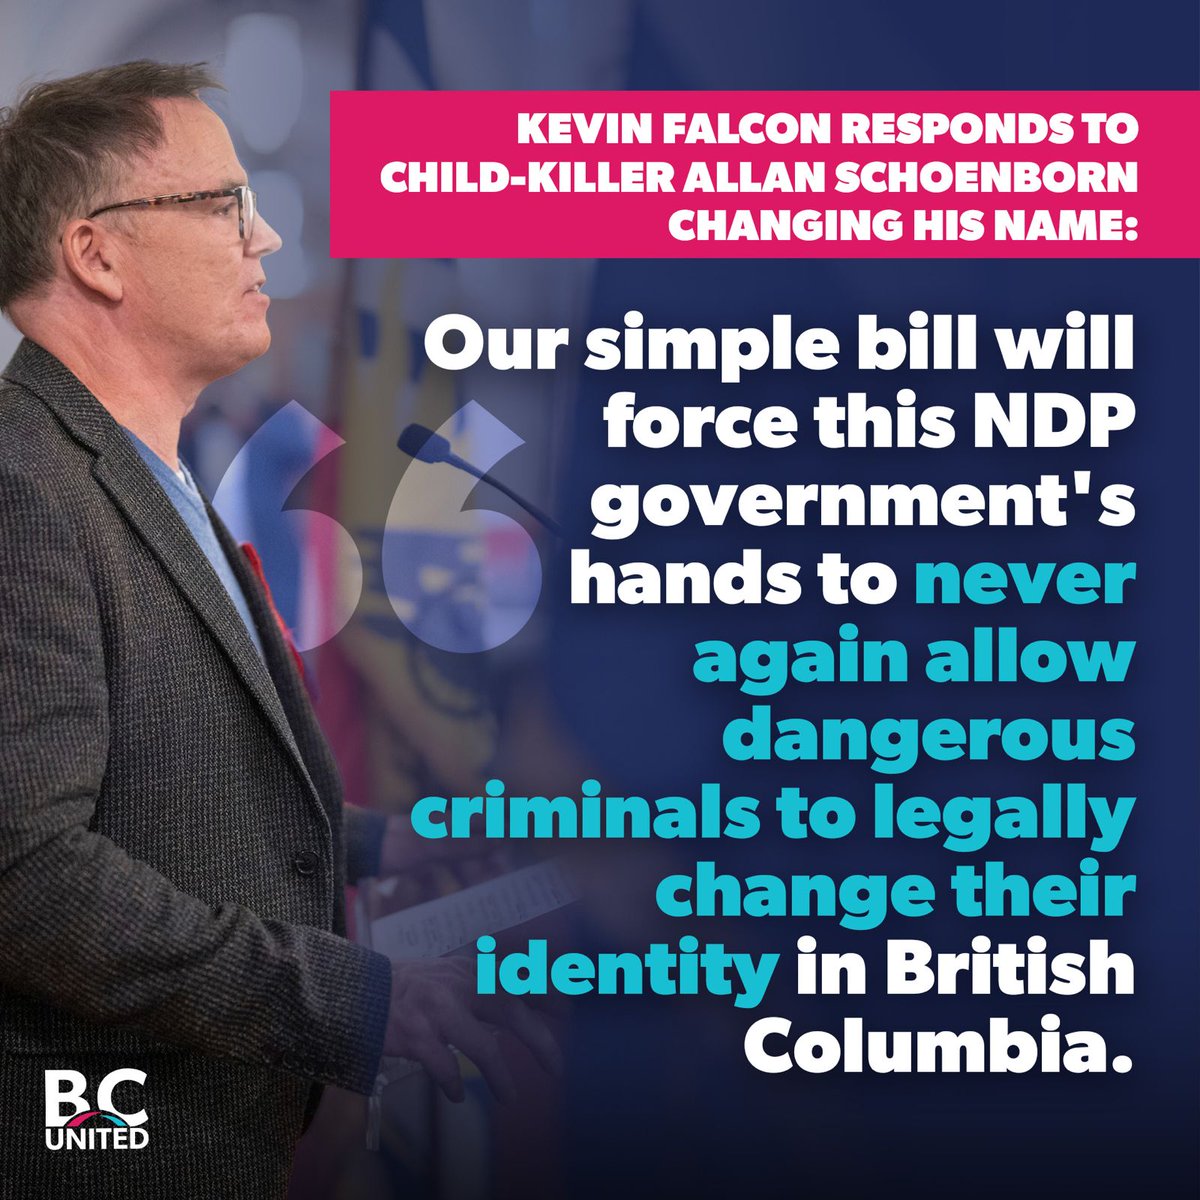 Our simple bill will force this NDP government’s hands to never again allow dangerous criminals like Allan Schoenborn to legally hide their identity in British Columbia. 

#UnitedWeWillFixIt